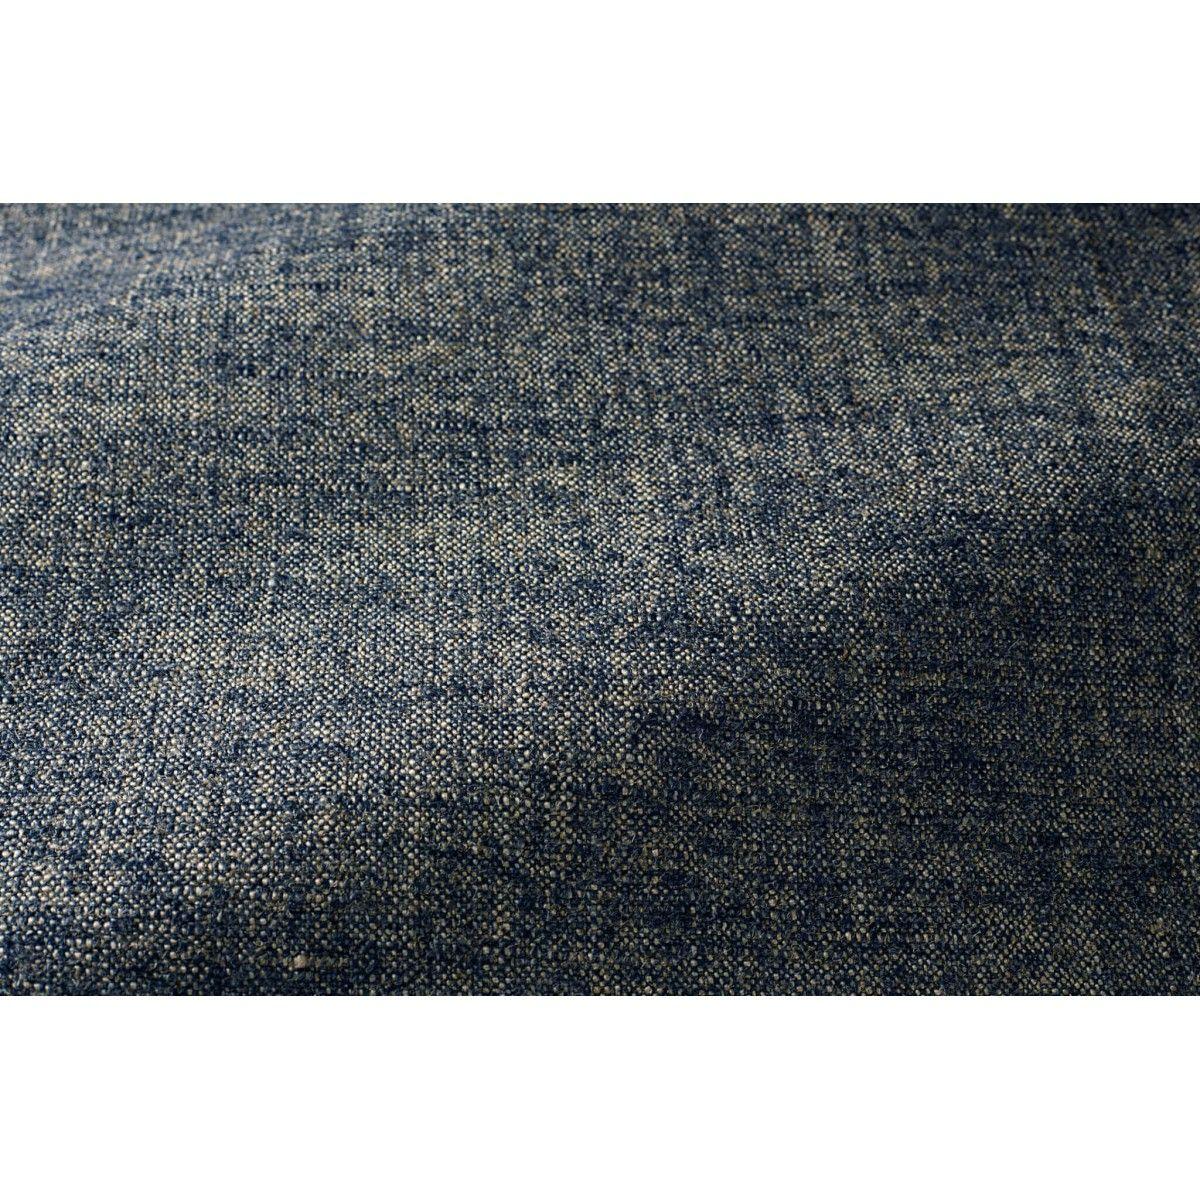 Popus Editions Giovanna 4 Seater Sofa in Marine London Linen Fabric

Giovanna is a sofa with a strong profile. A sober, plush line, with this famous detail that changes everything, so as not to forget its strength of character and this charming